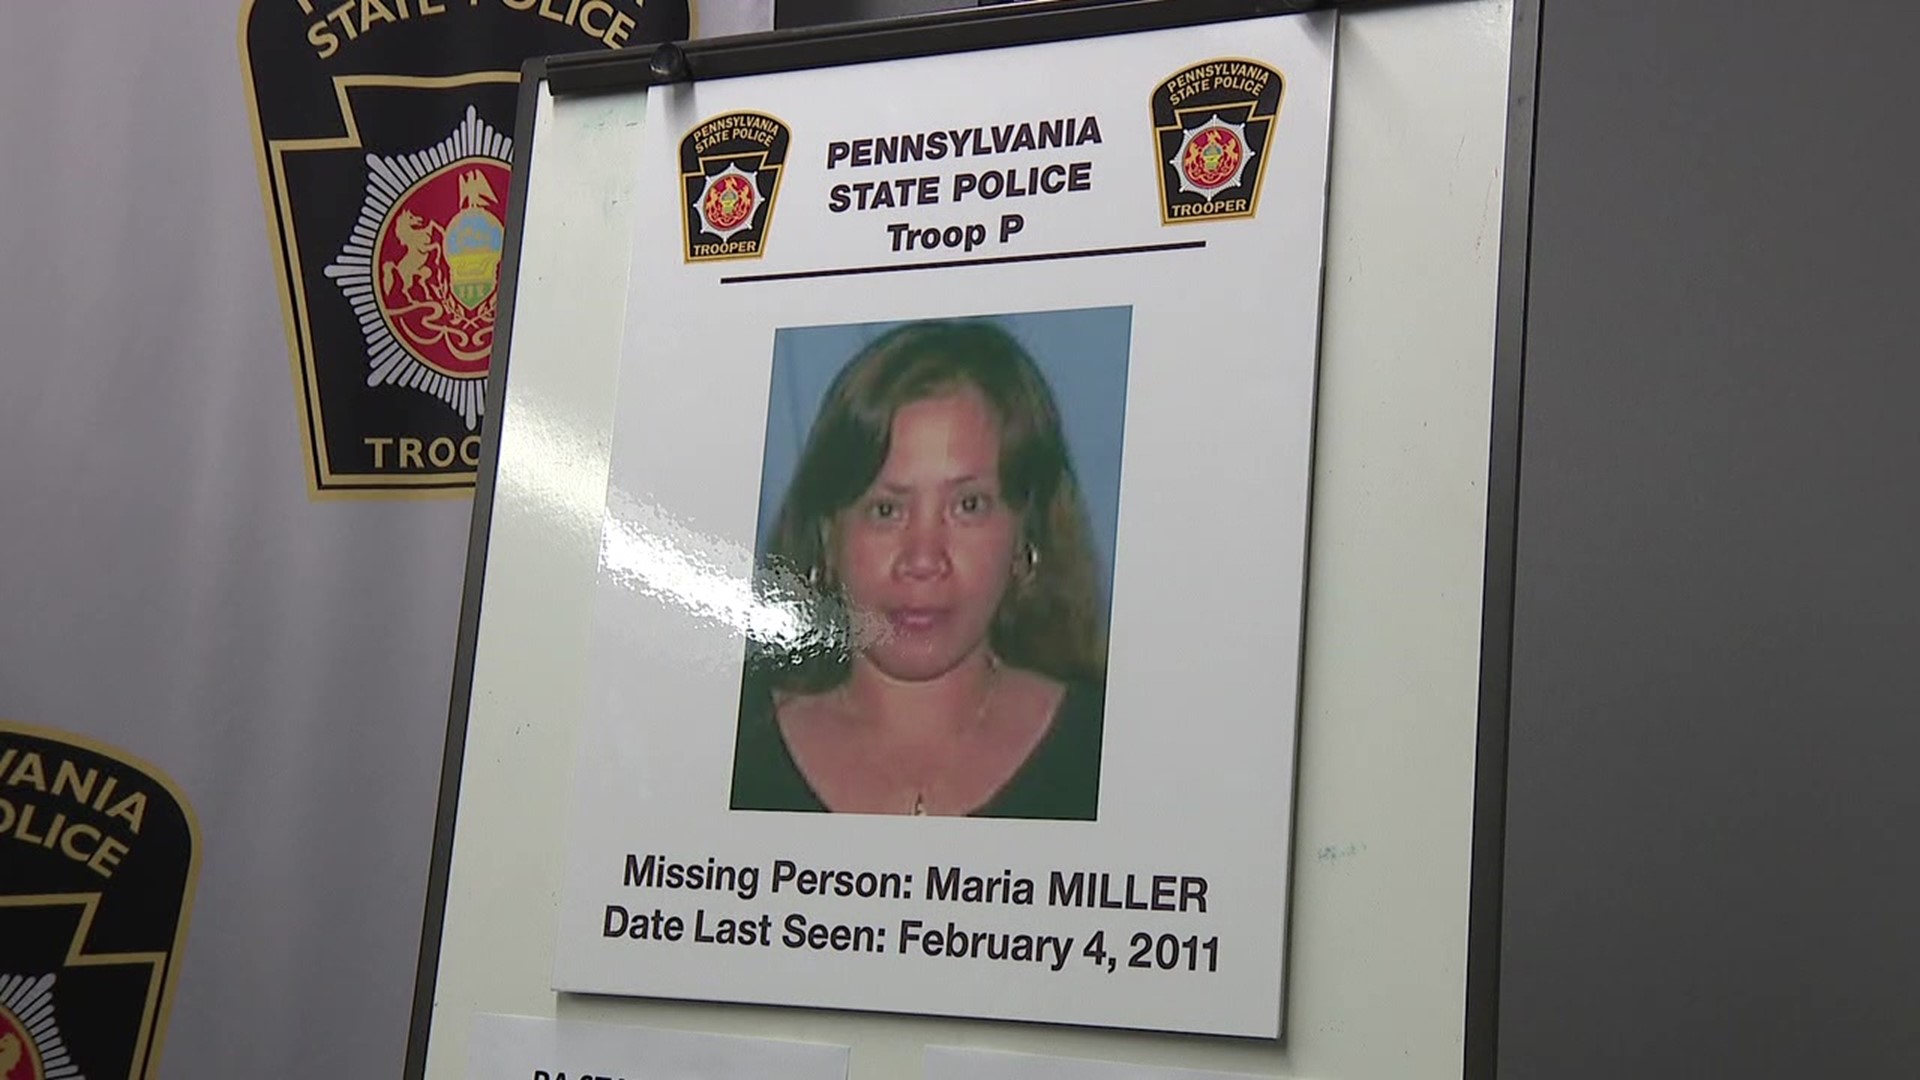 State police say Maria Miller was last seen at a Dandy Mart near Wysox in February of 2011.